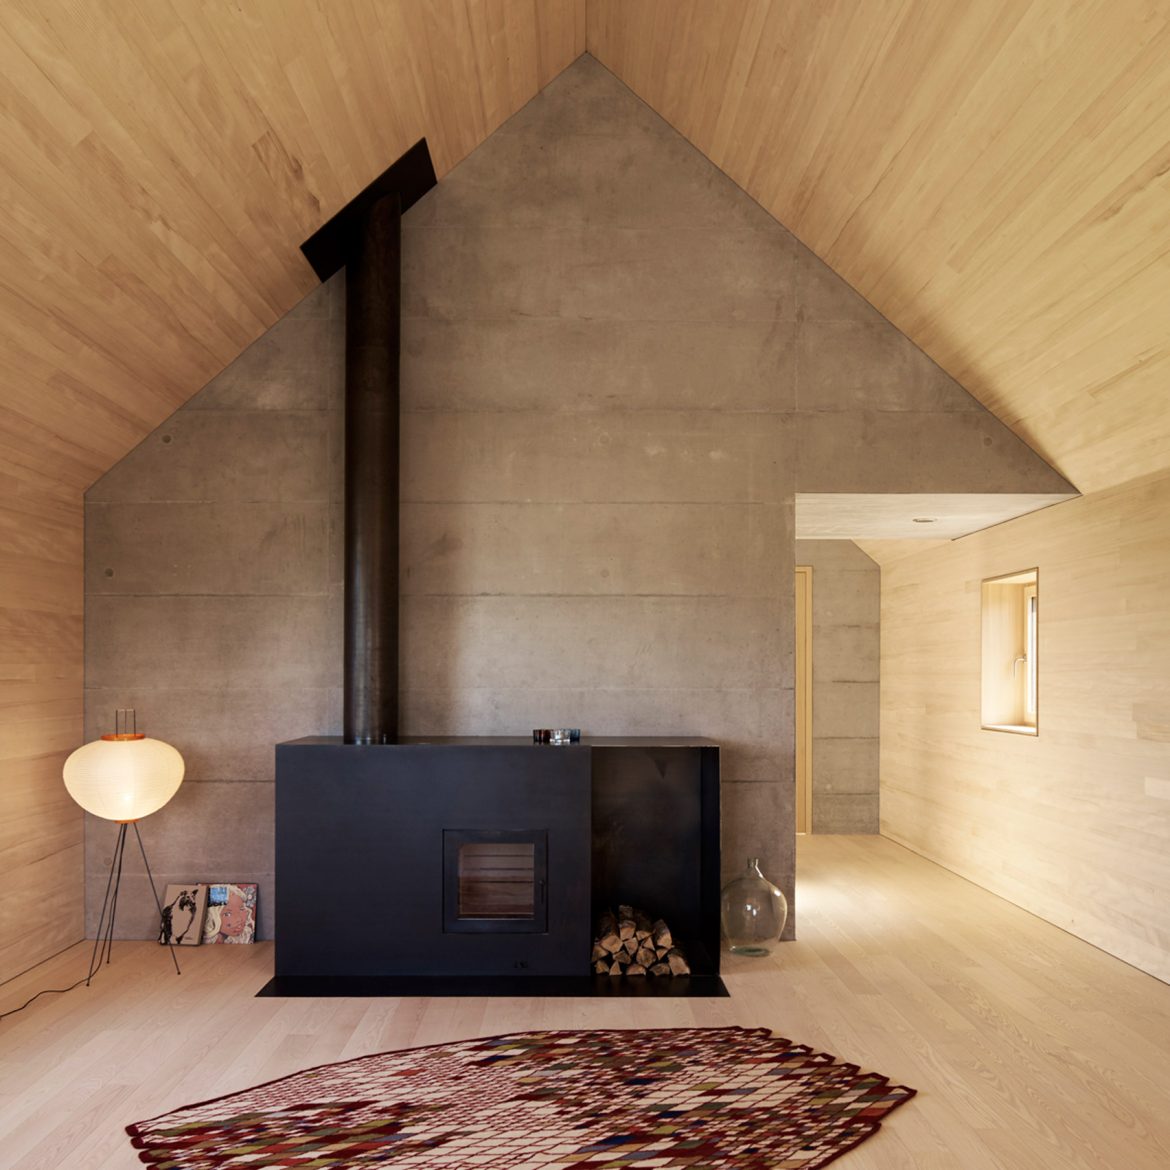 10 COZY HOMES_WITH FIREPLACES FROM PINTEREST BOARDS